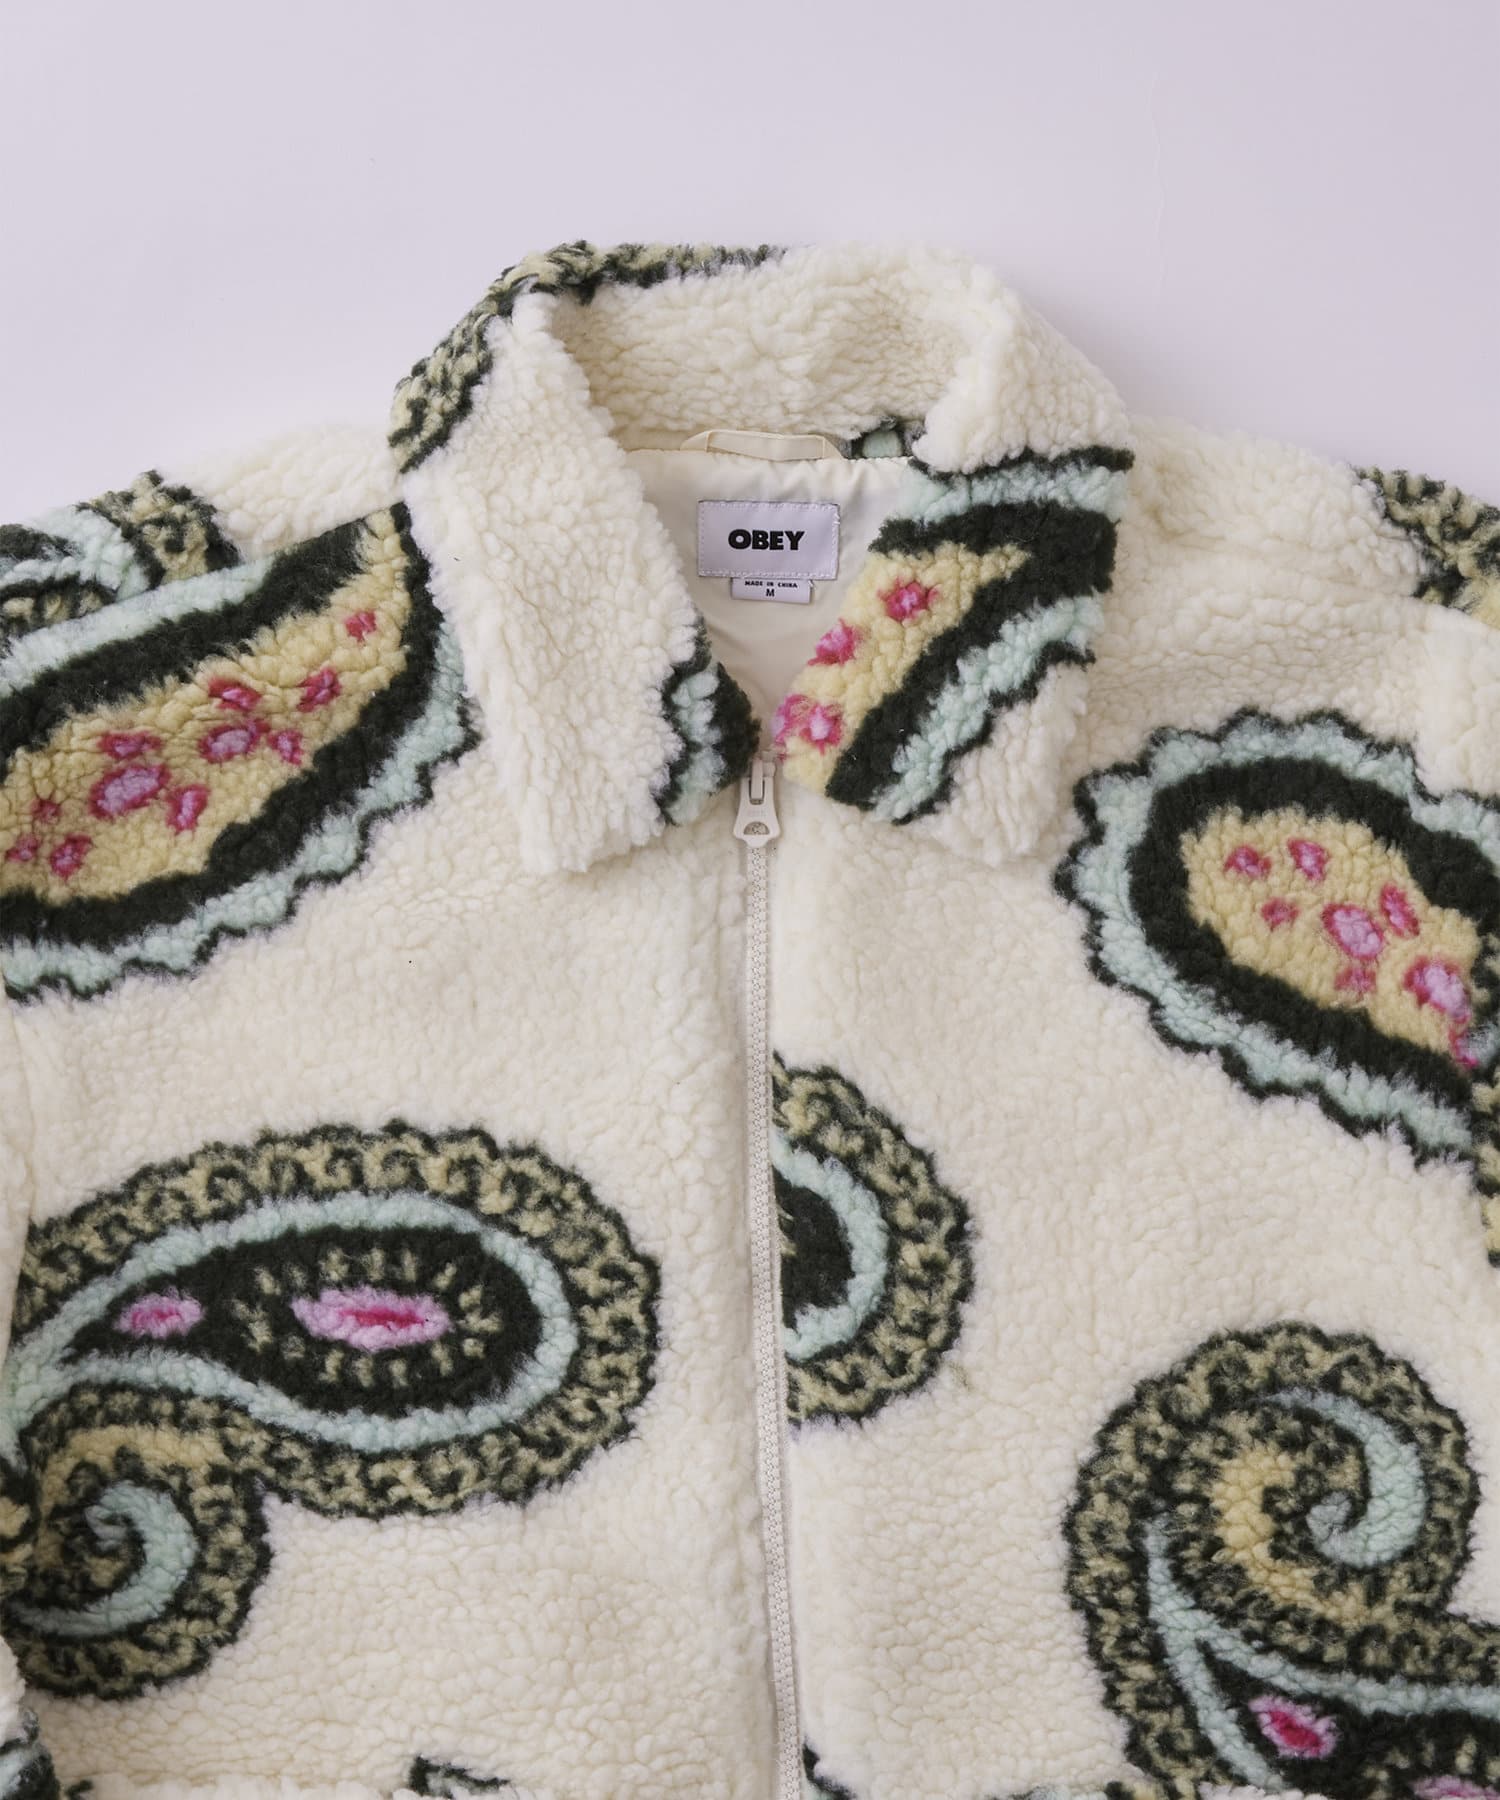 OBEY PAISLEY SHERPA JACKET | WHO'S WHO gallery(フーズフー